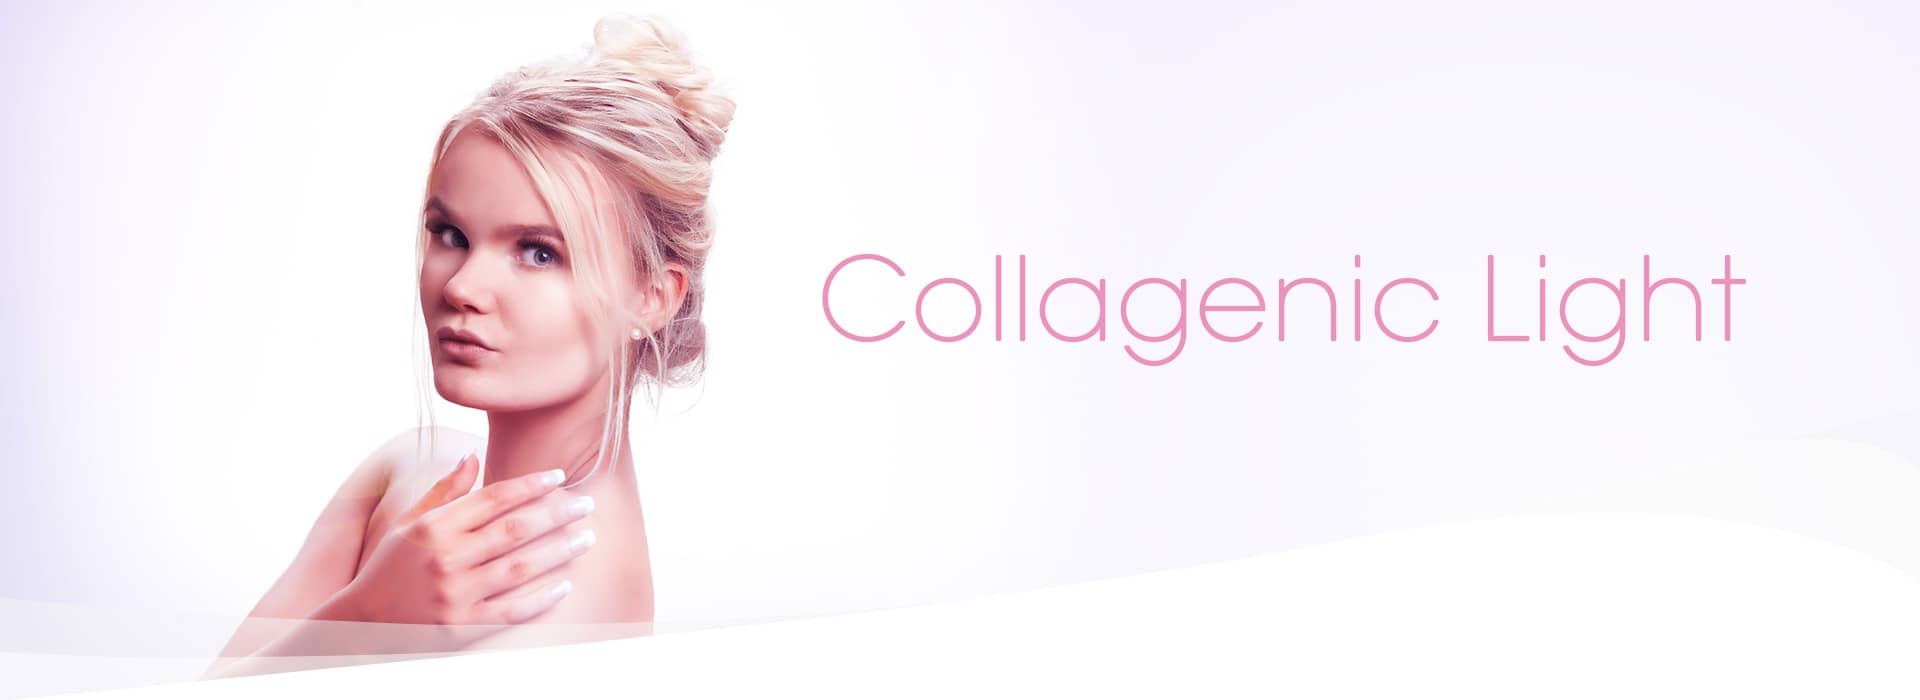 Dr. Muller header Collagenic Light research